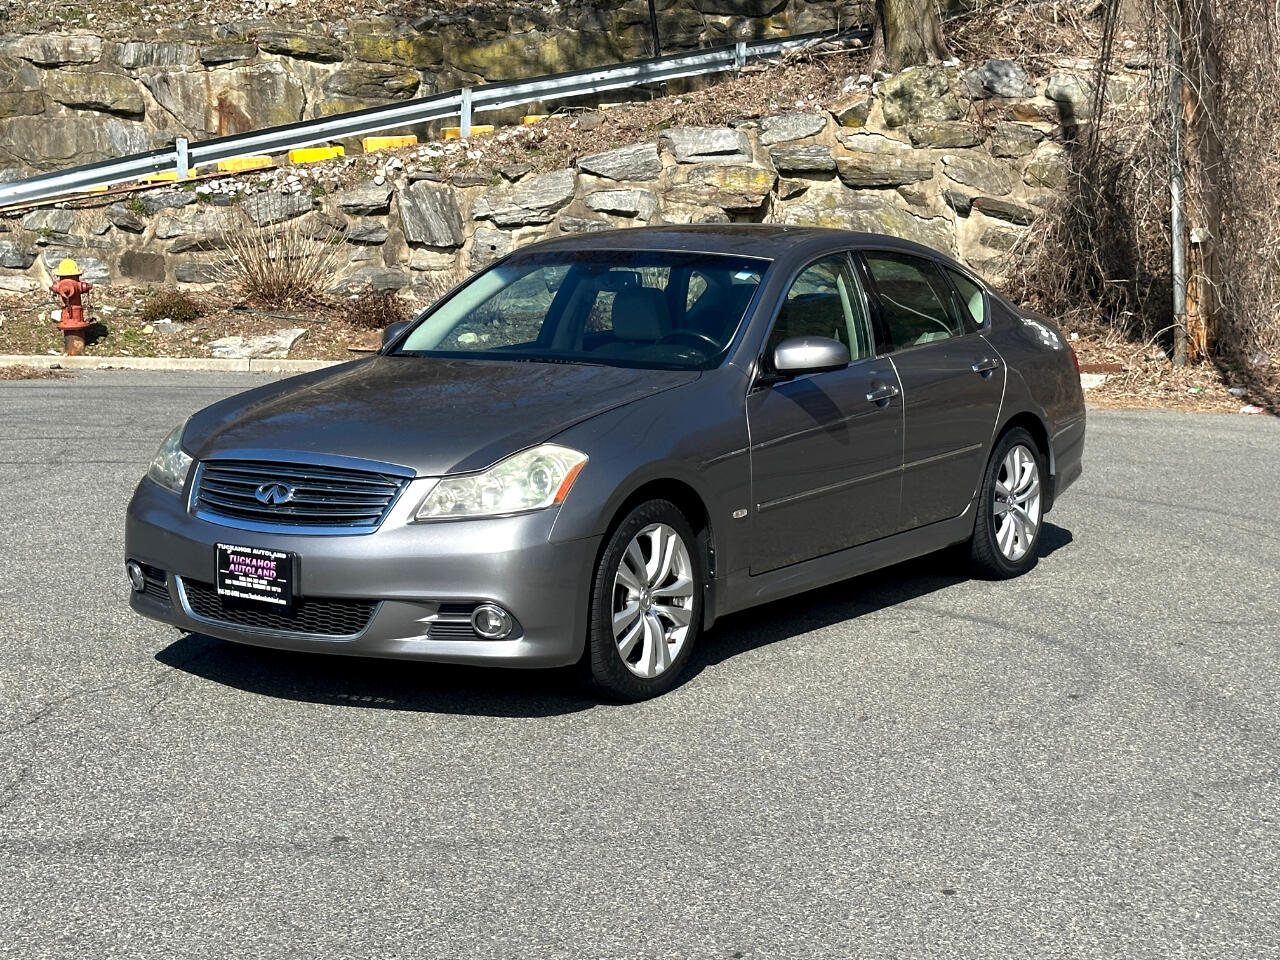 Used 2008 Infiniti M45's nationwide for sale - MotorCloud